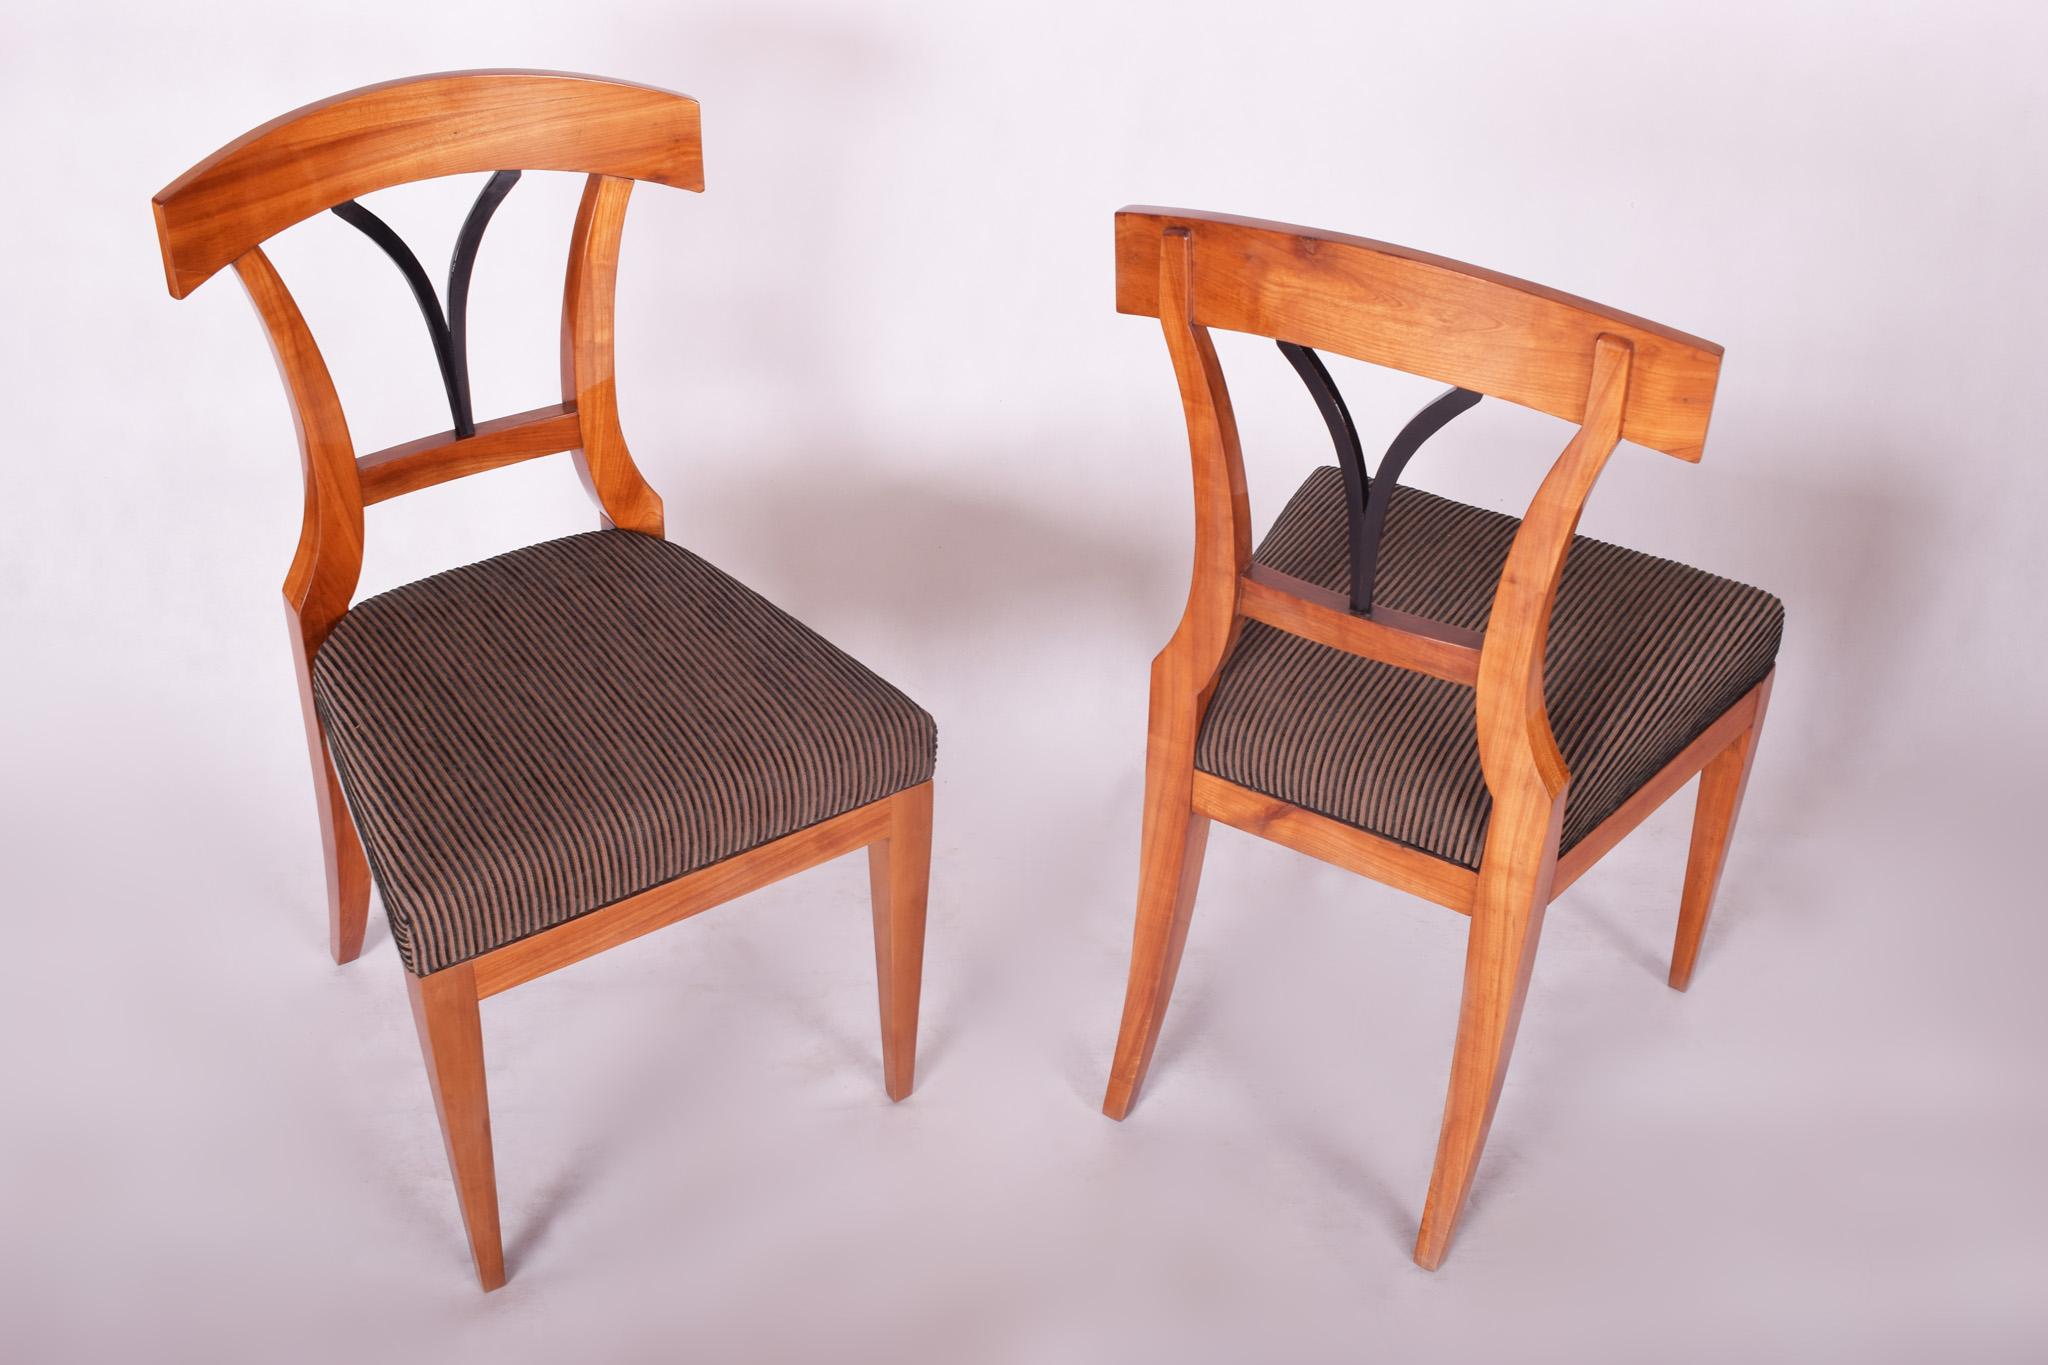 Pair of 19th Century Biedermeier Dining Chairs Made in 1930s Czechia For Sale 3